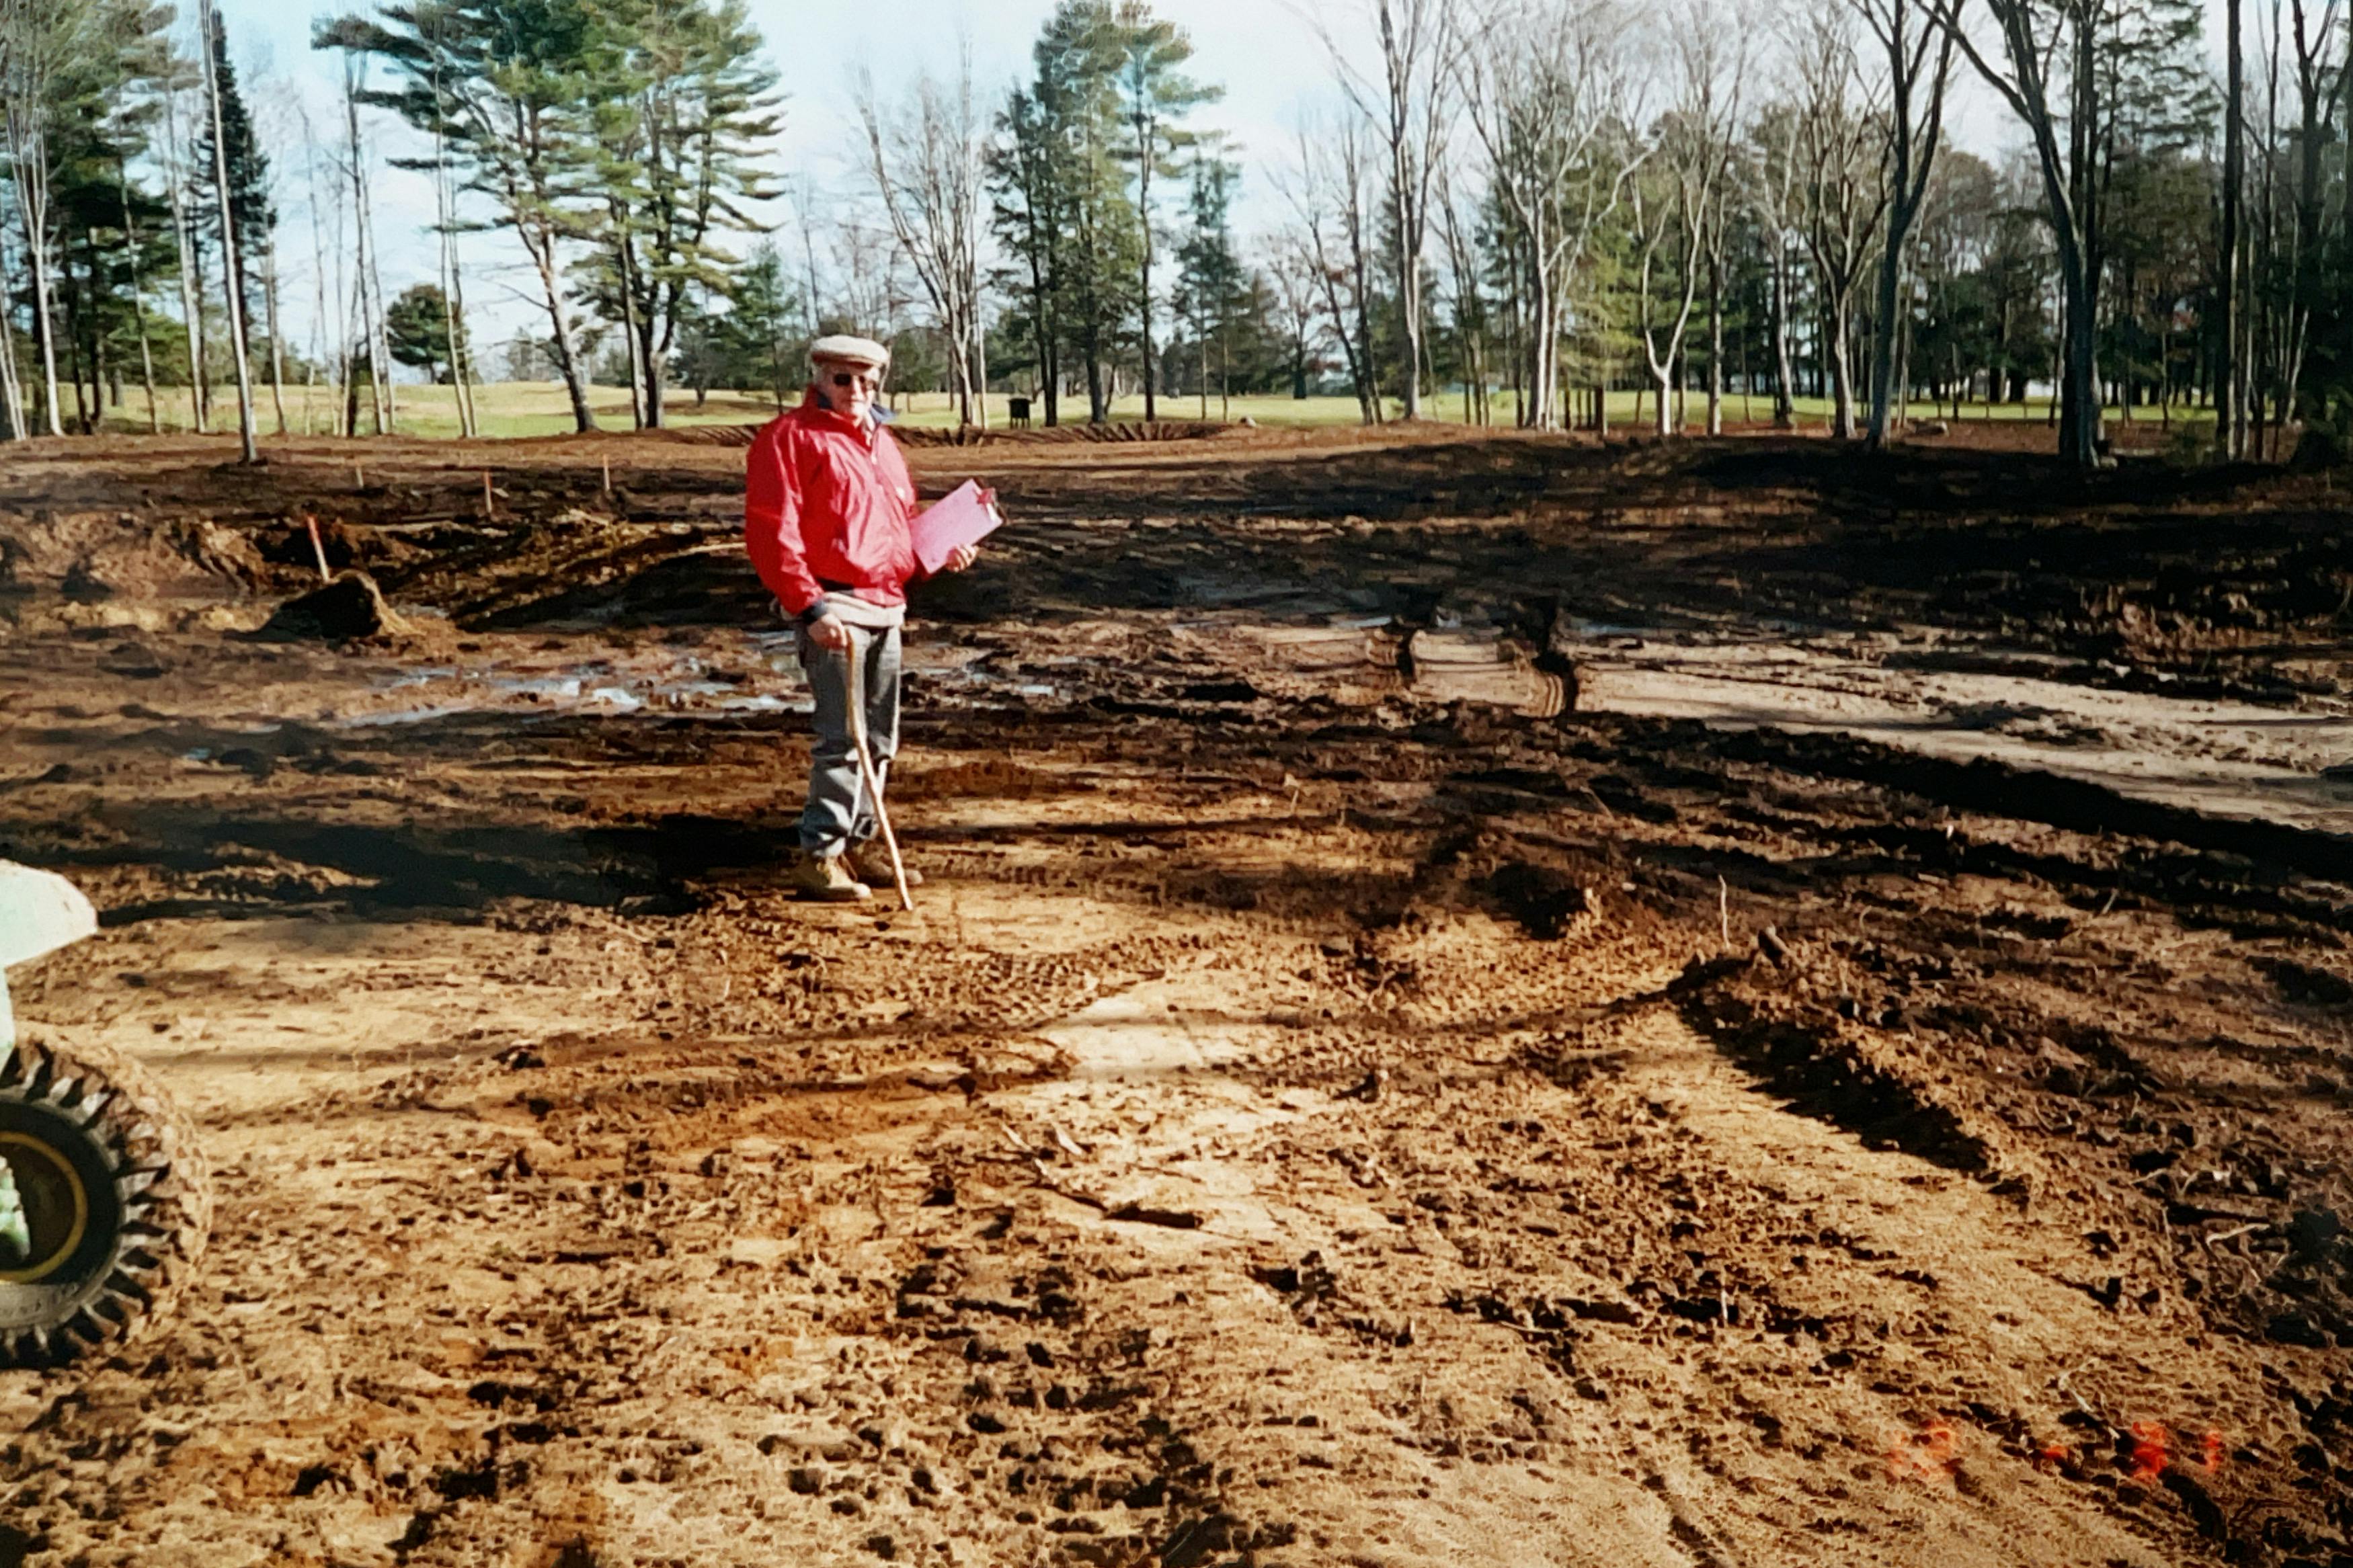 Bob Moote on 9 west during construction